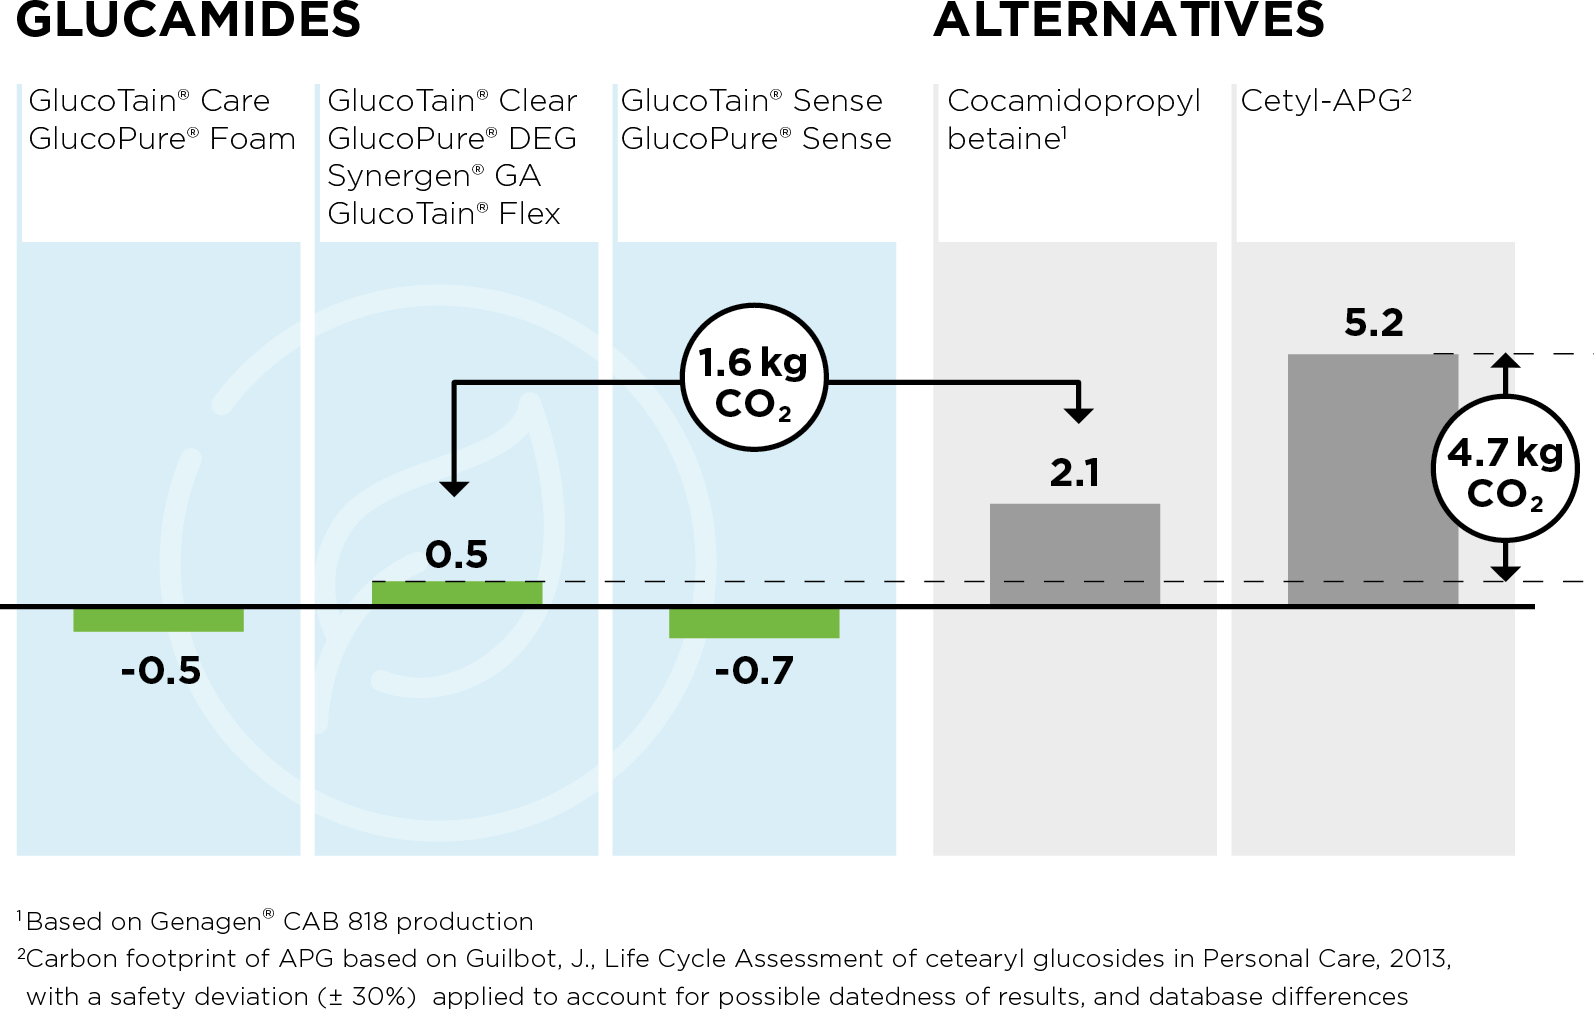 Clariant Image LOW-CARBON GLUCAMIDES_calculation 2020